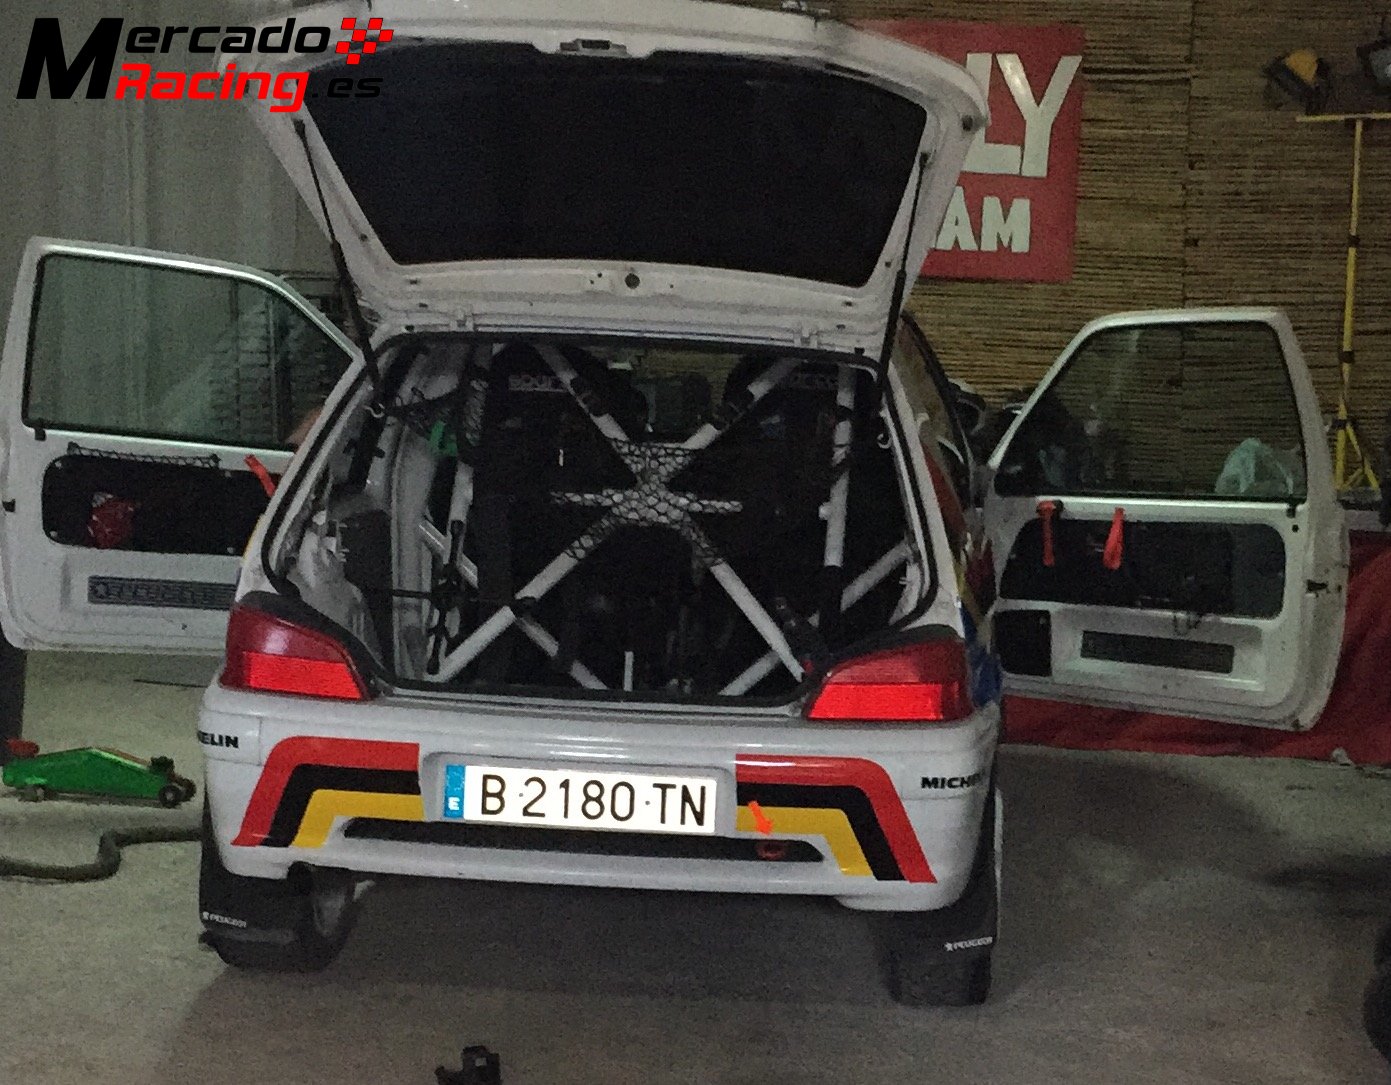 Peugeot 106 rally gr.a 